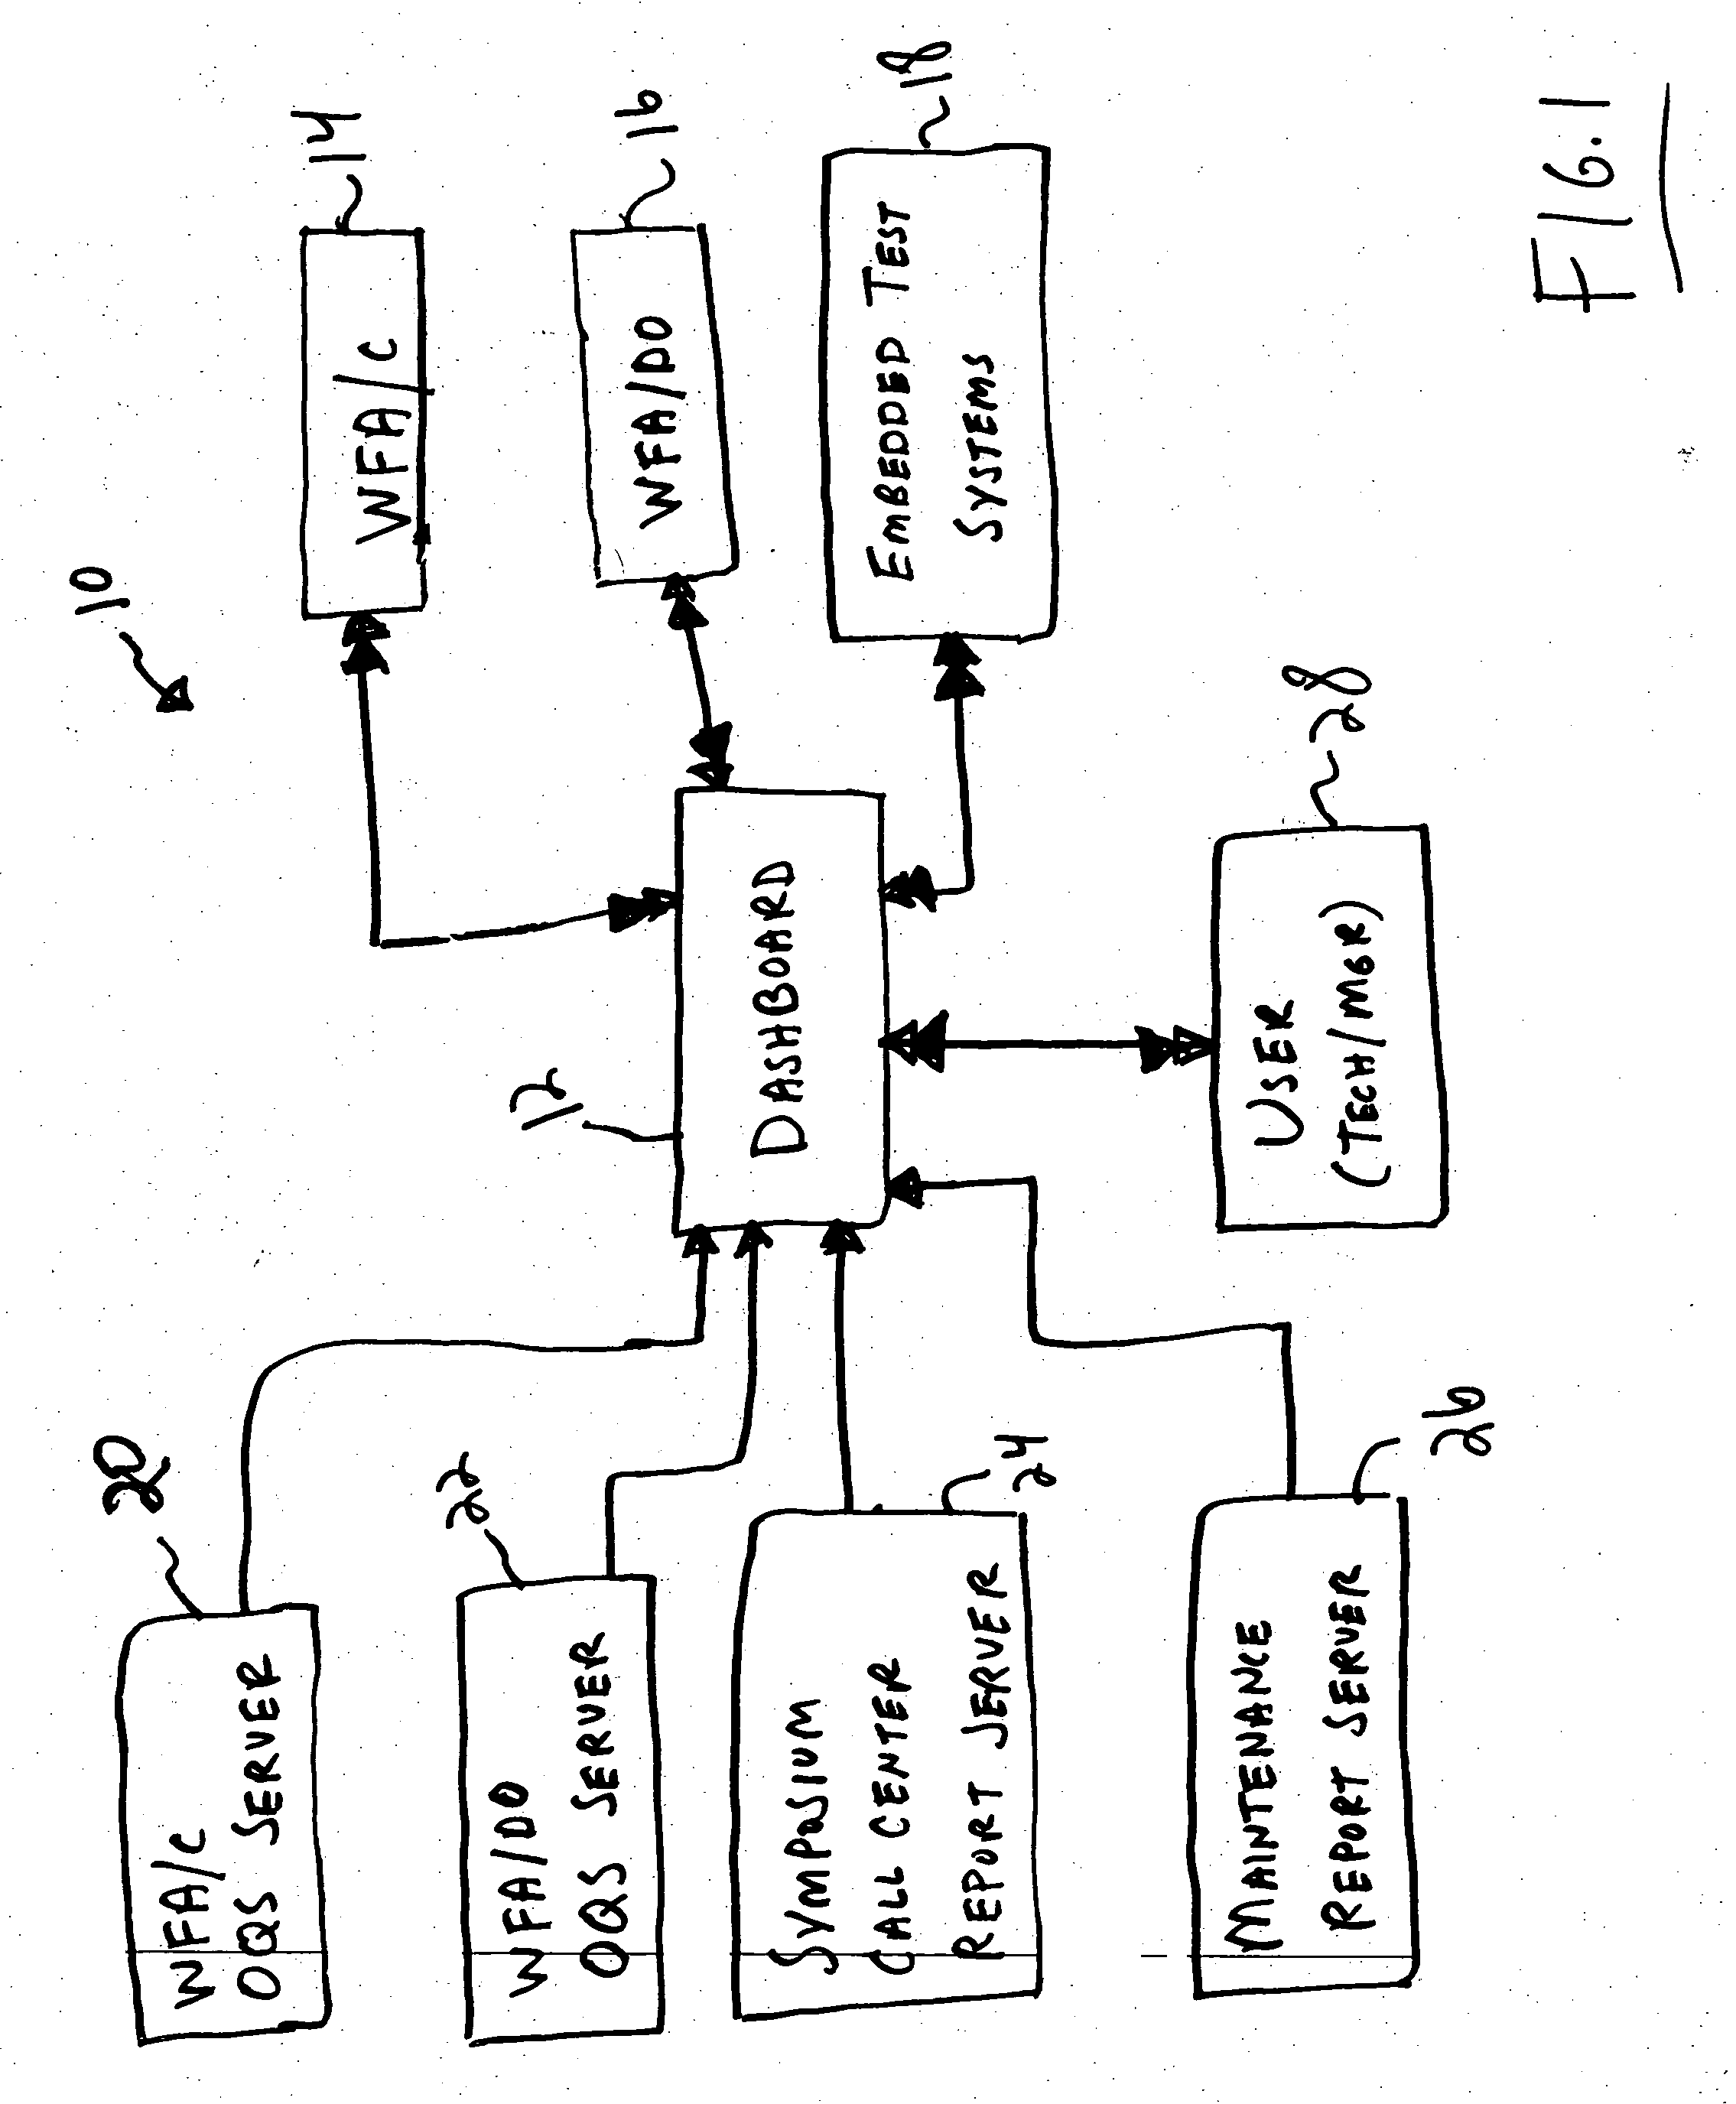 Trouble ticket monitoring system having internet enabled and web-based graphical user interface to trouble ticket workload management systems